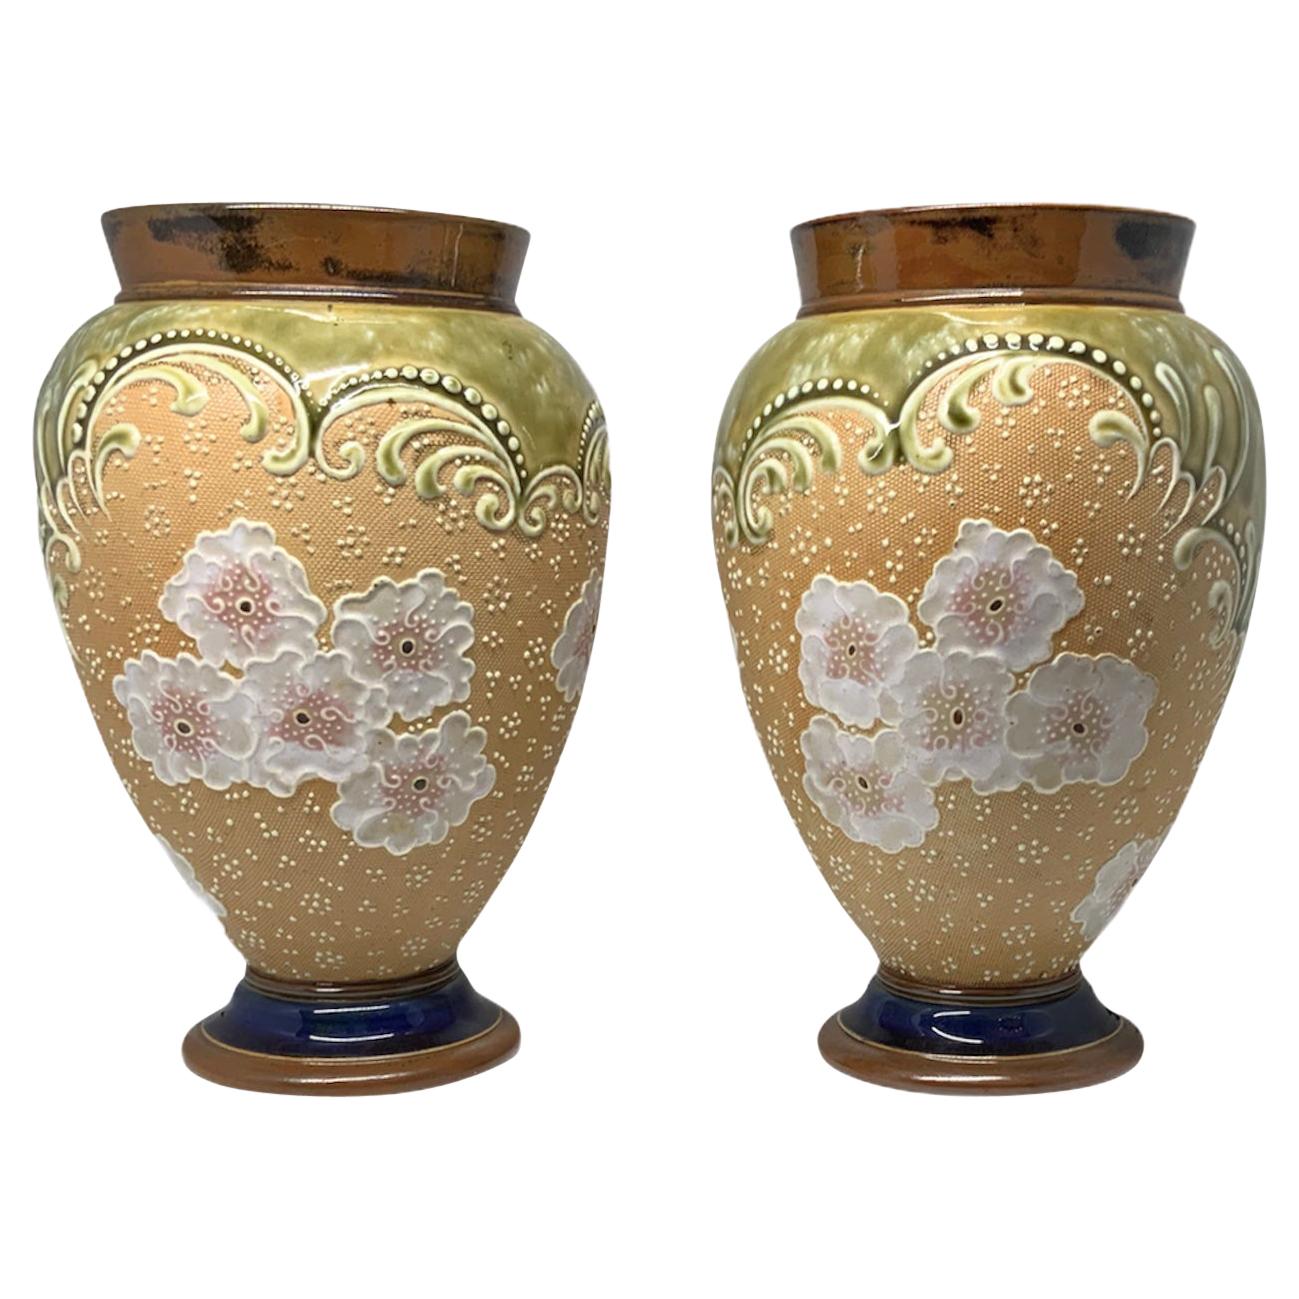 Royal Doulton and Slater Hand Painted Pair of Stoneware Vases